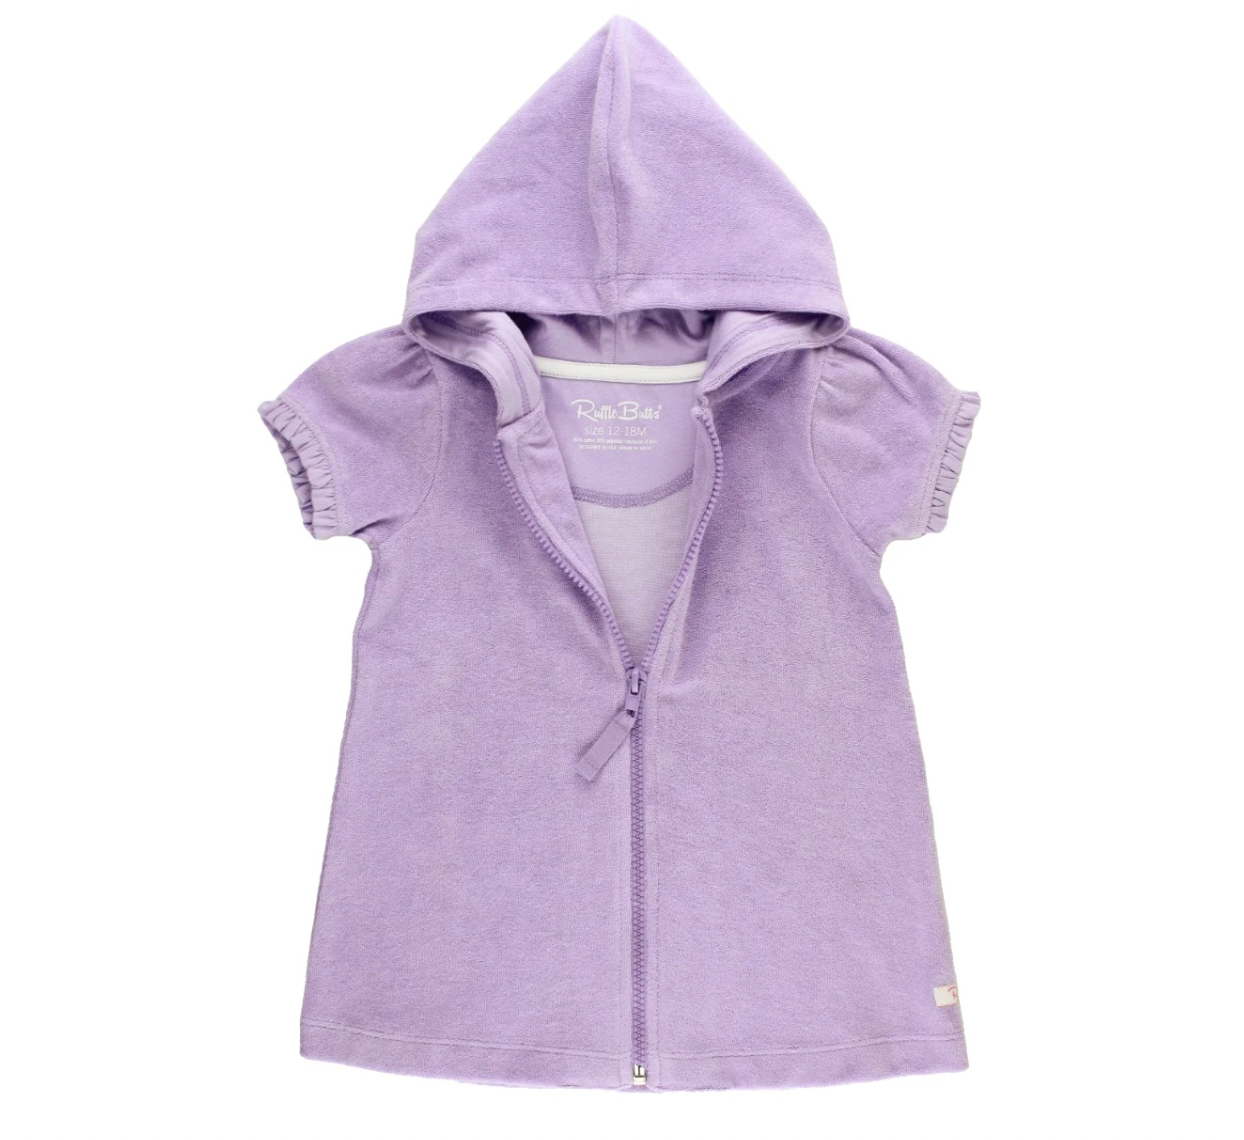 Terry Zip Cover-Up, Lavender - Magpies Paducah